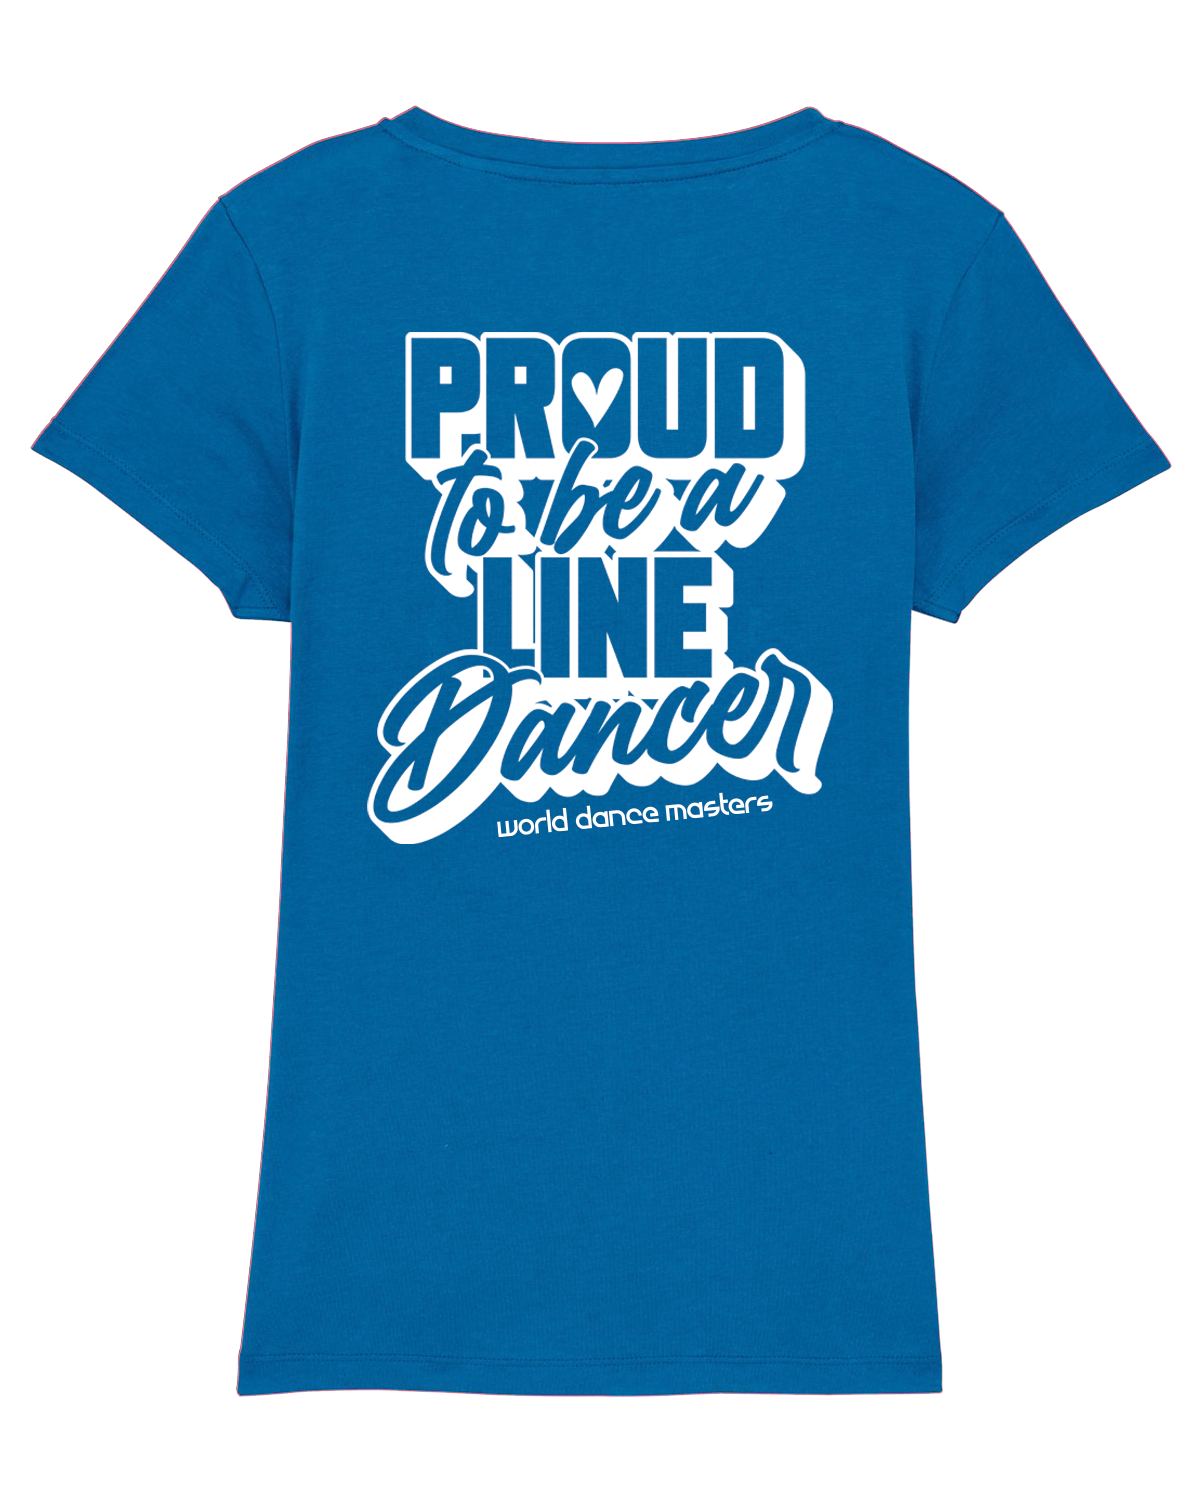 New "Proud to be a Line Dancer" T-Shirt